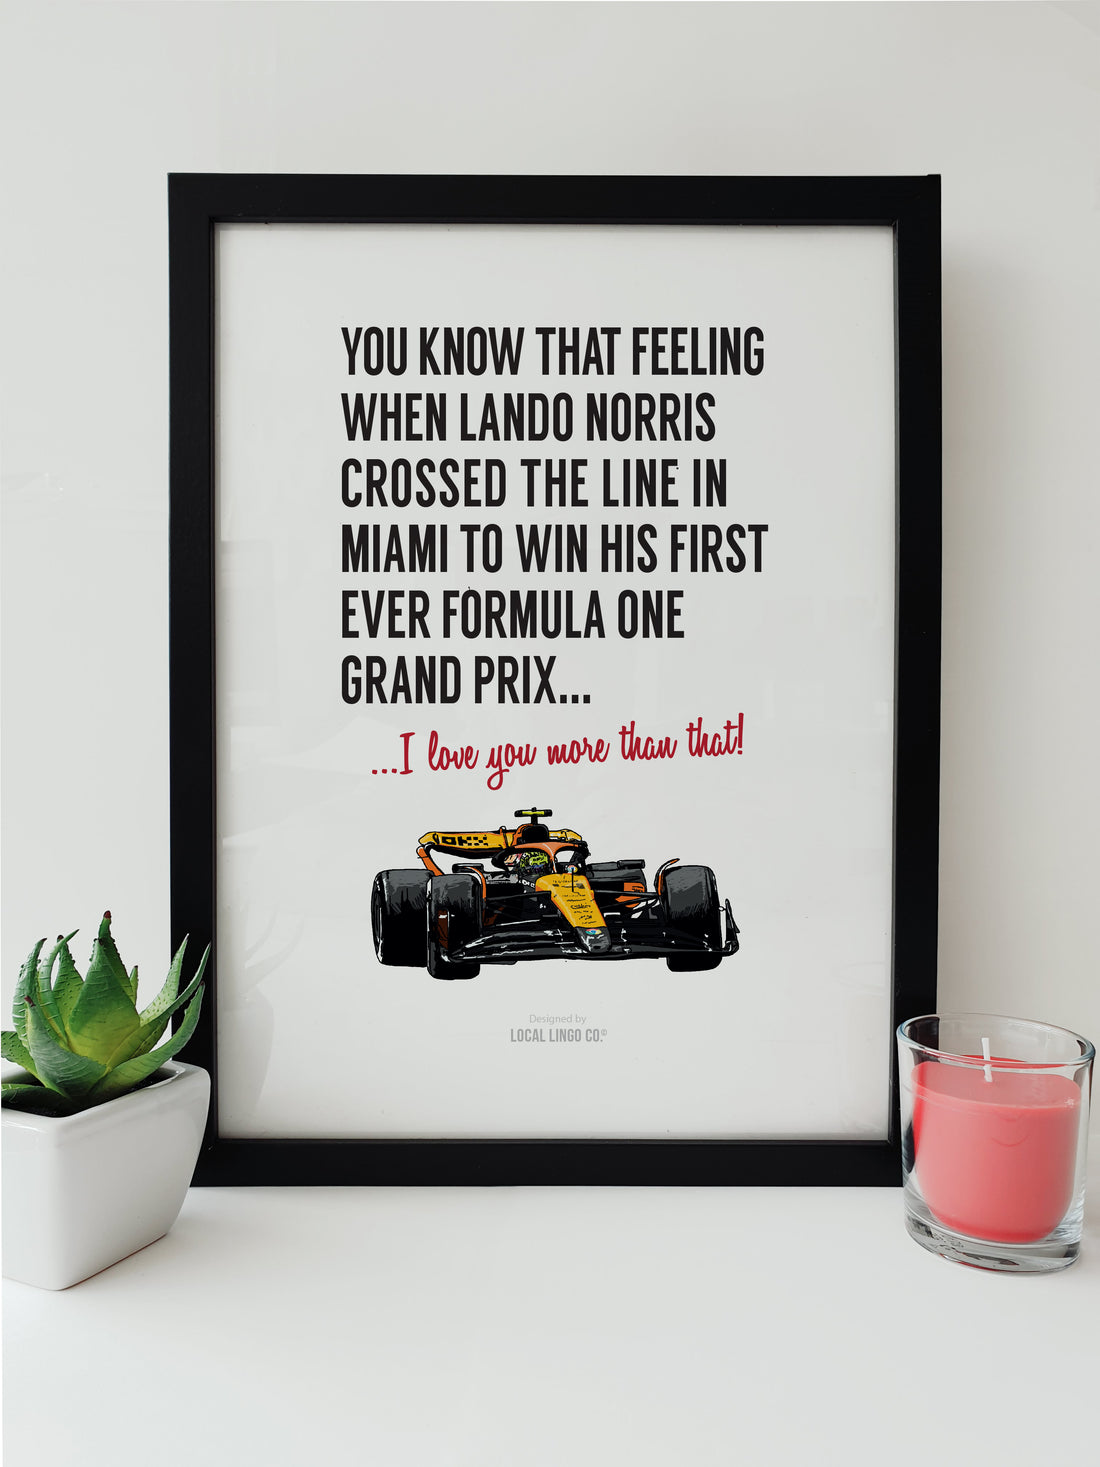 Framed print of Lando Norris winning his first Formula One Grand Prix in Miami. The artwork features a detailed, hand-drawn illustration of Norris in his race car, with the text: 'You know that feeling when Lando Norris crossed the line in Miami to win his first ever Formula One Grand Prix... I love you more than that!' Designed by Local Lingo Co., this print captures a significant moment in motorsport, perfect for fans of Formula One racing.